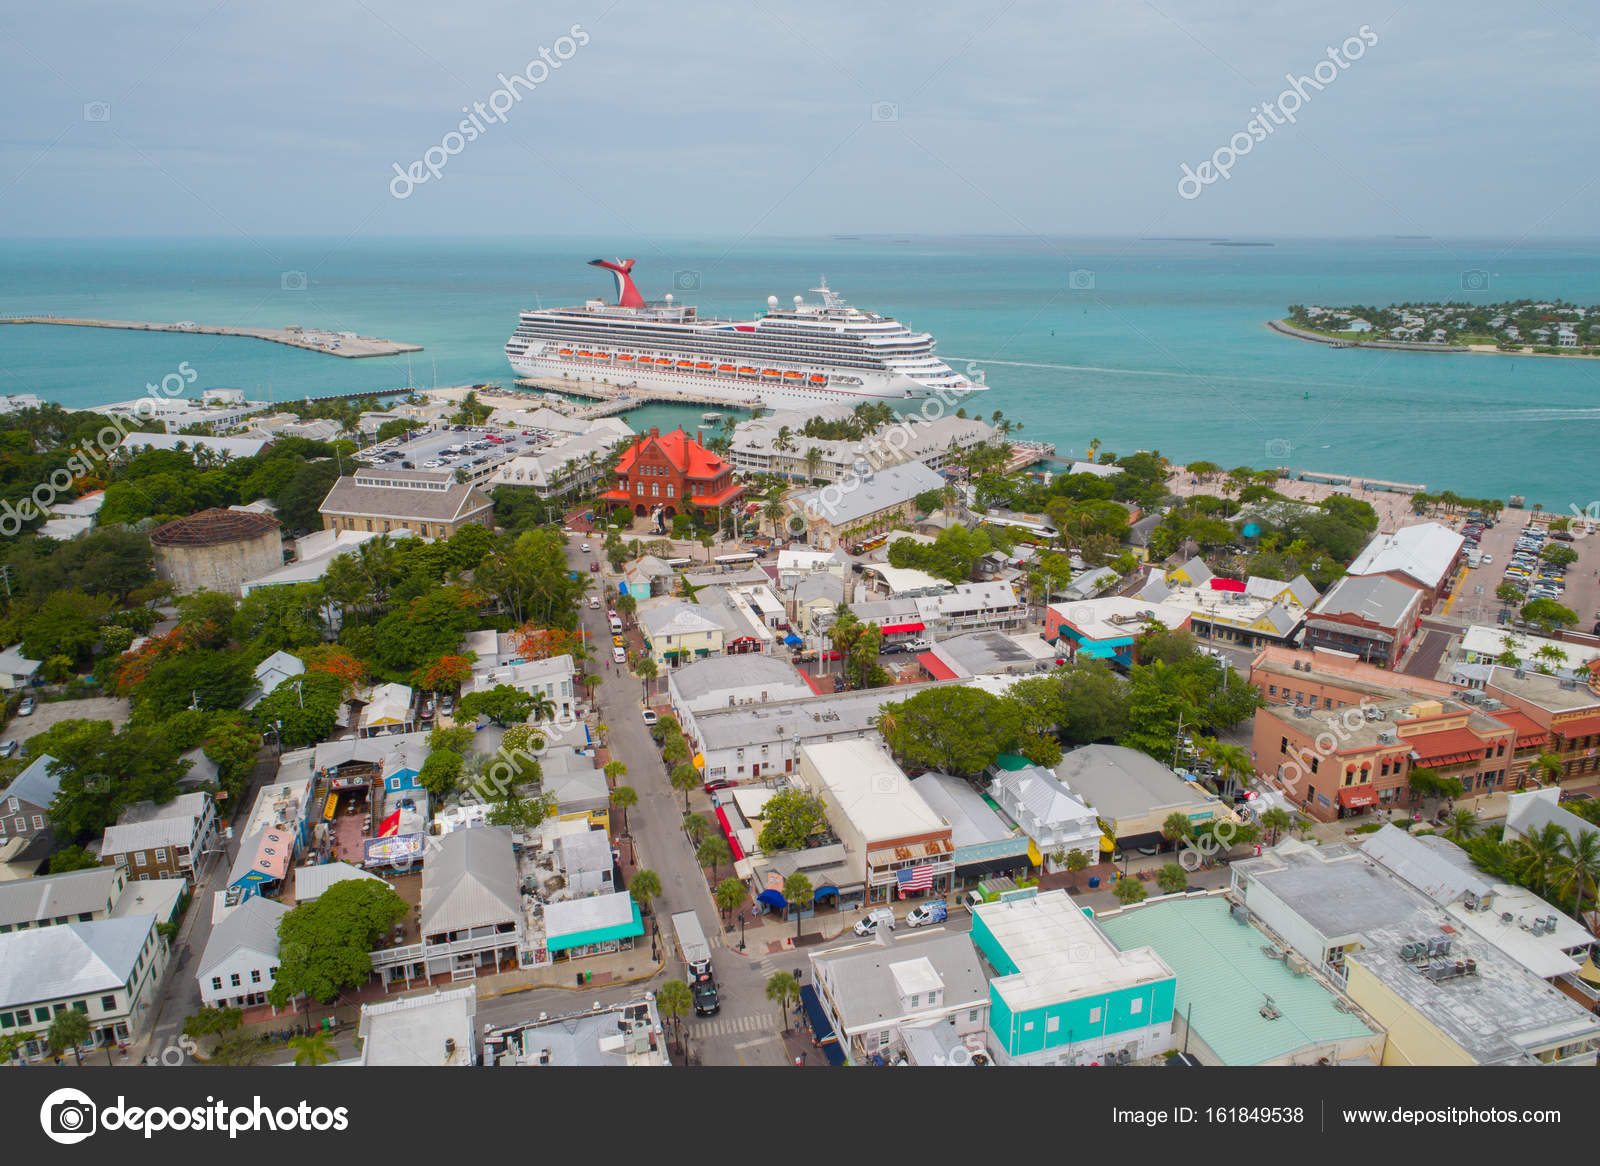 Key West Florida Aerial Image - Stock Editorial Photo © Felixtm #161849538 with Aerial Photography Contract Template